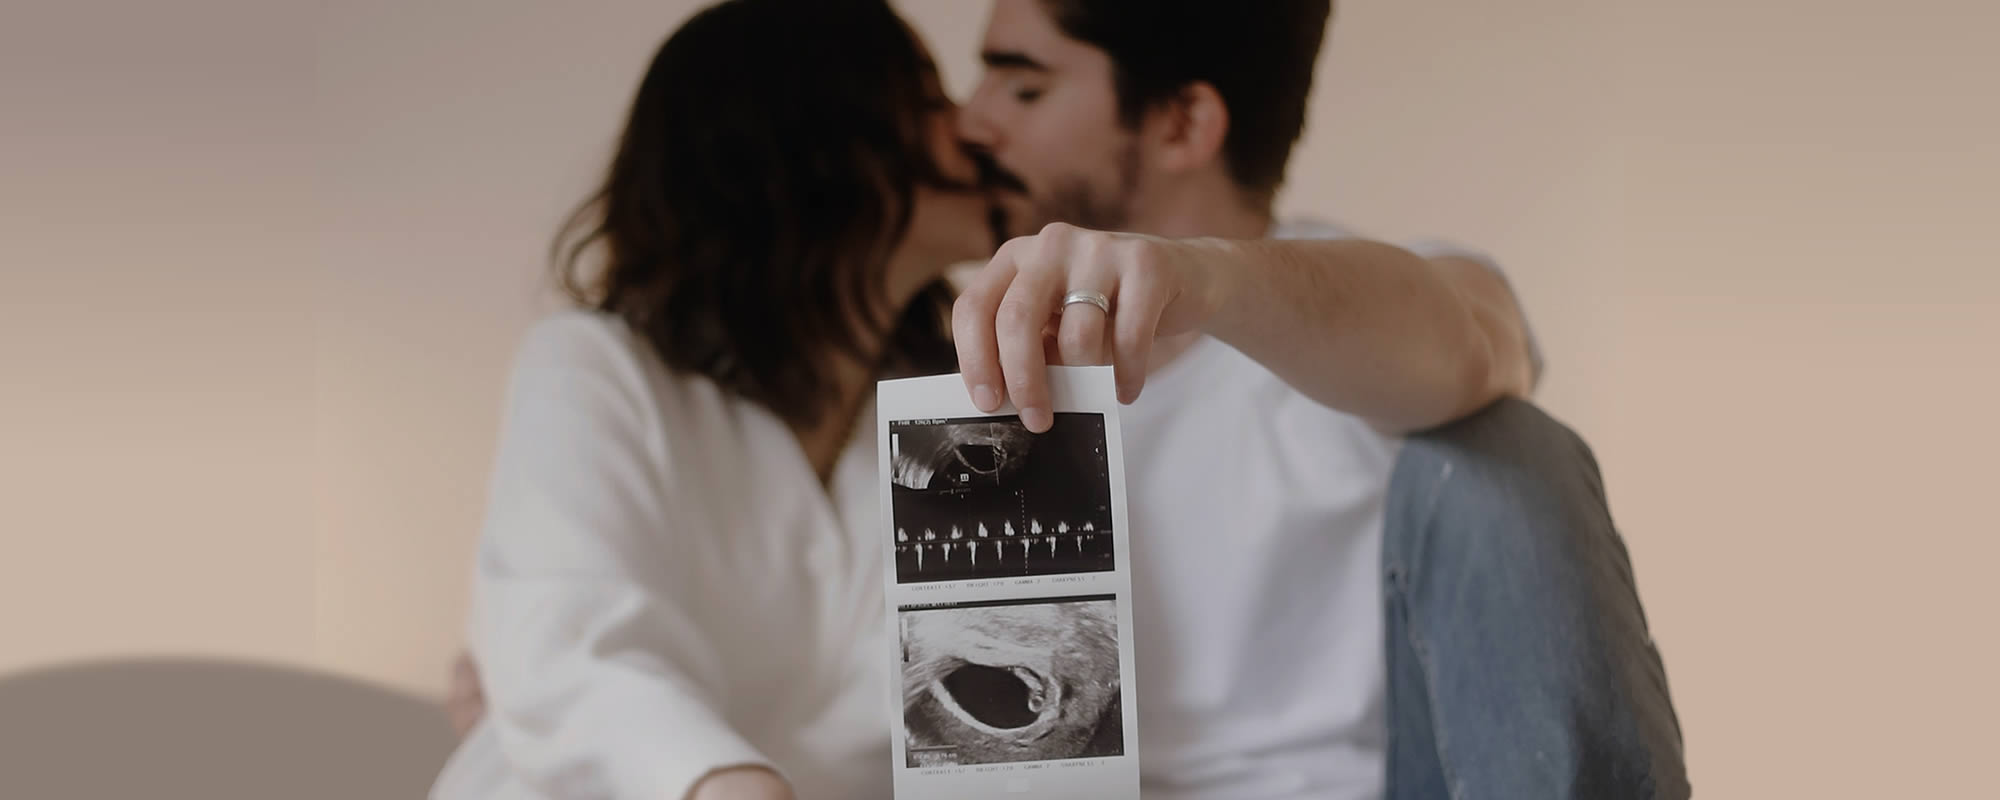 Loving Couple holding Baby Scan Photographs